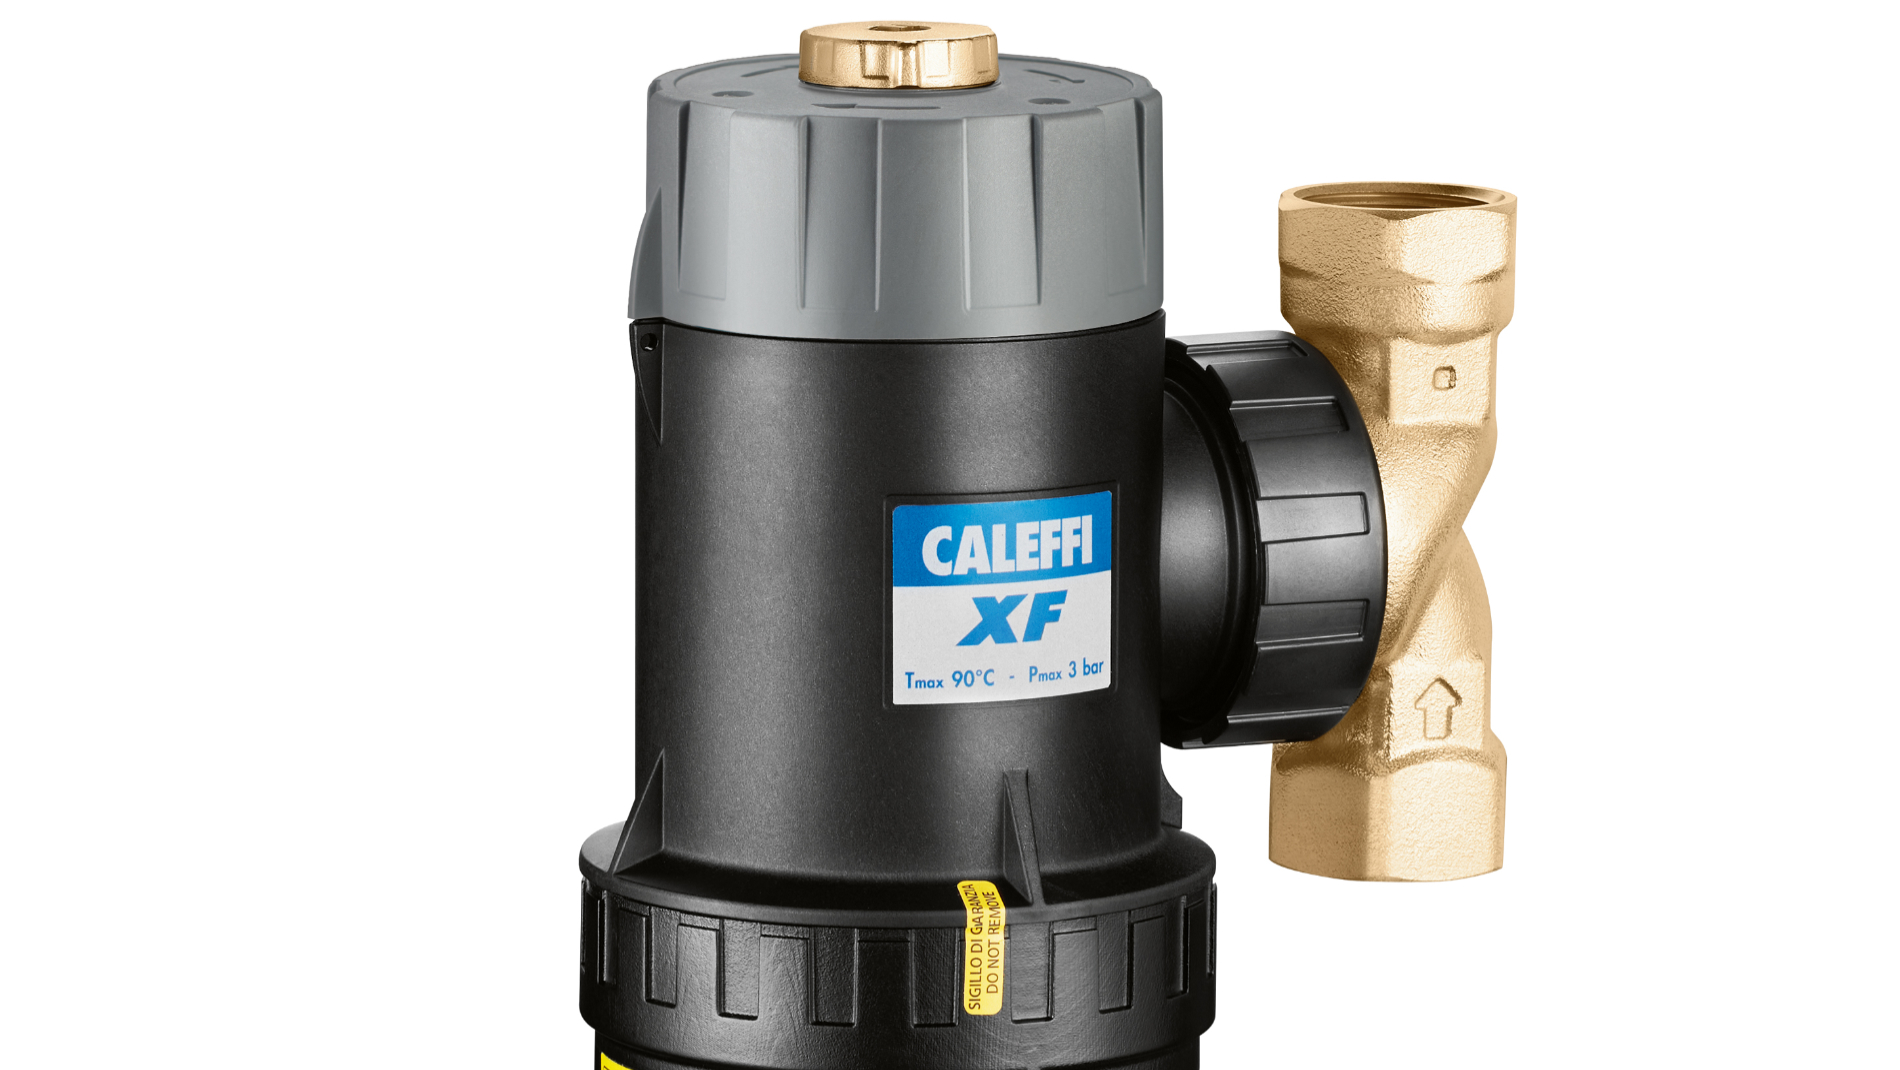 CALEFFI XF Semi-automatic self-cleaning magnetic filter (577 series) - Heat pump system, Water treatment